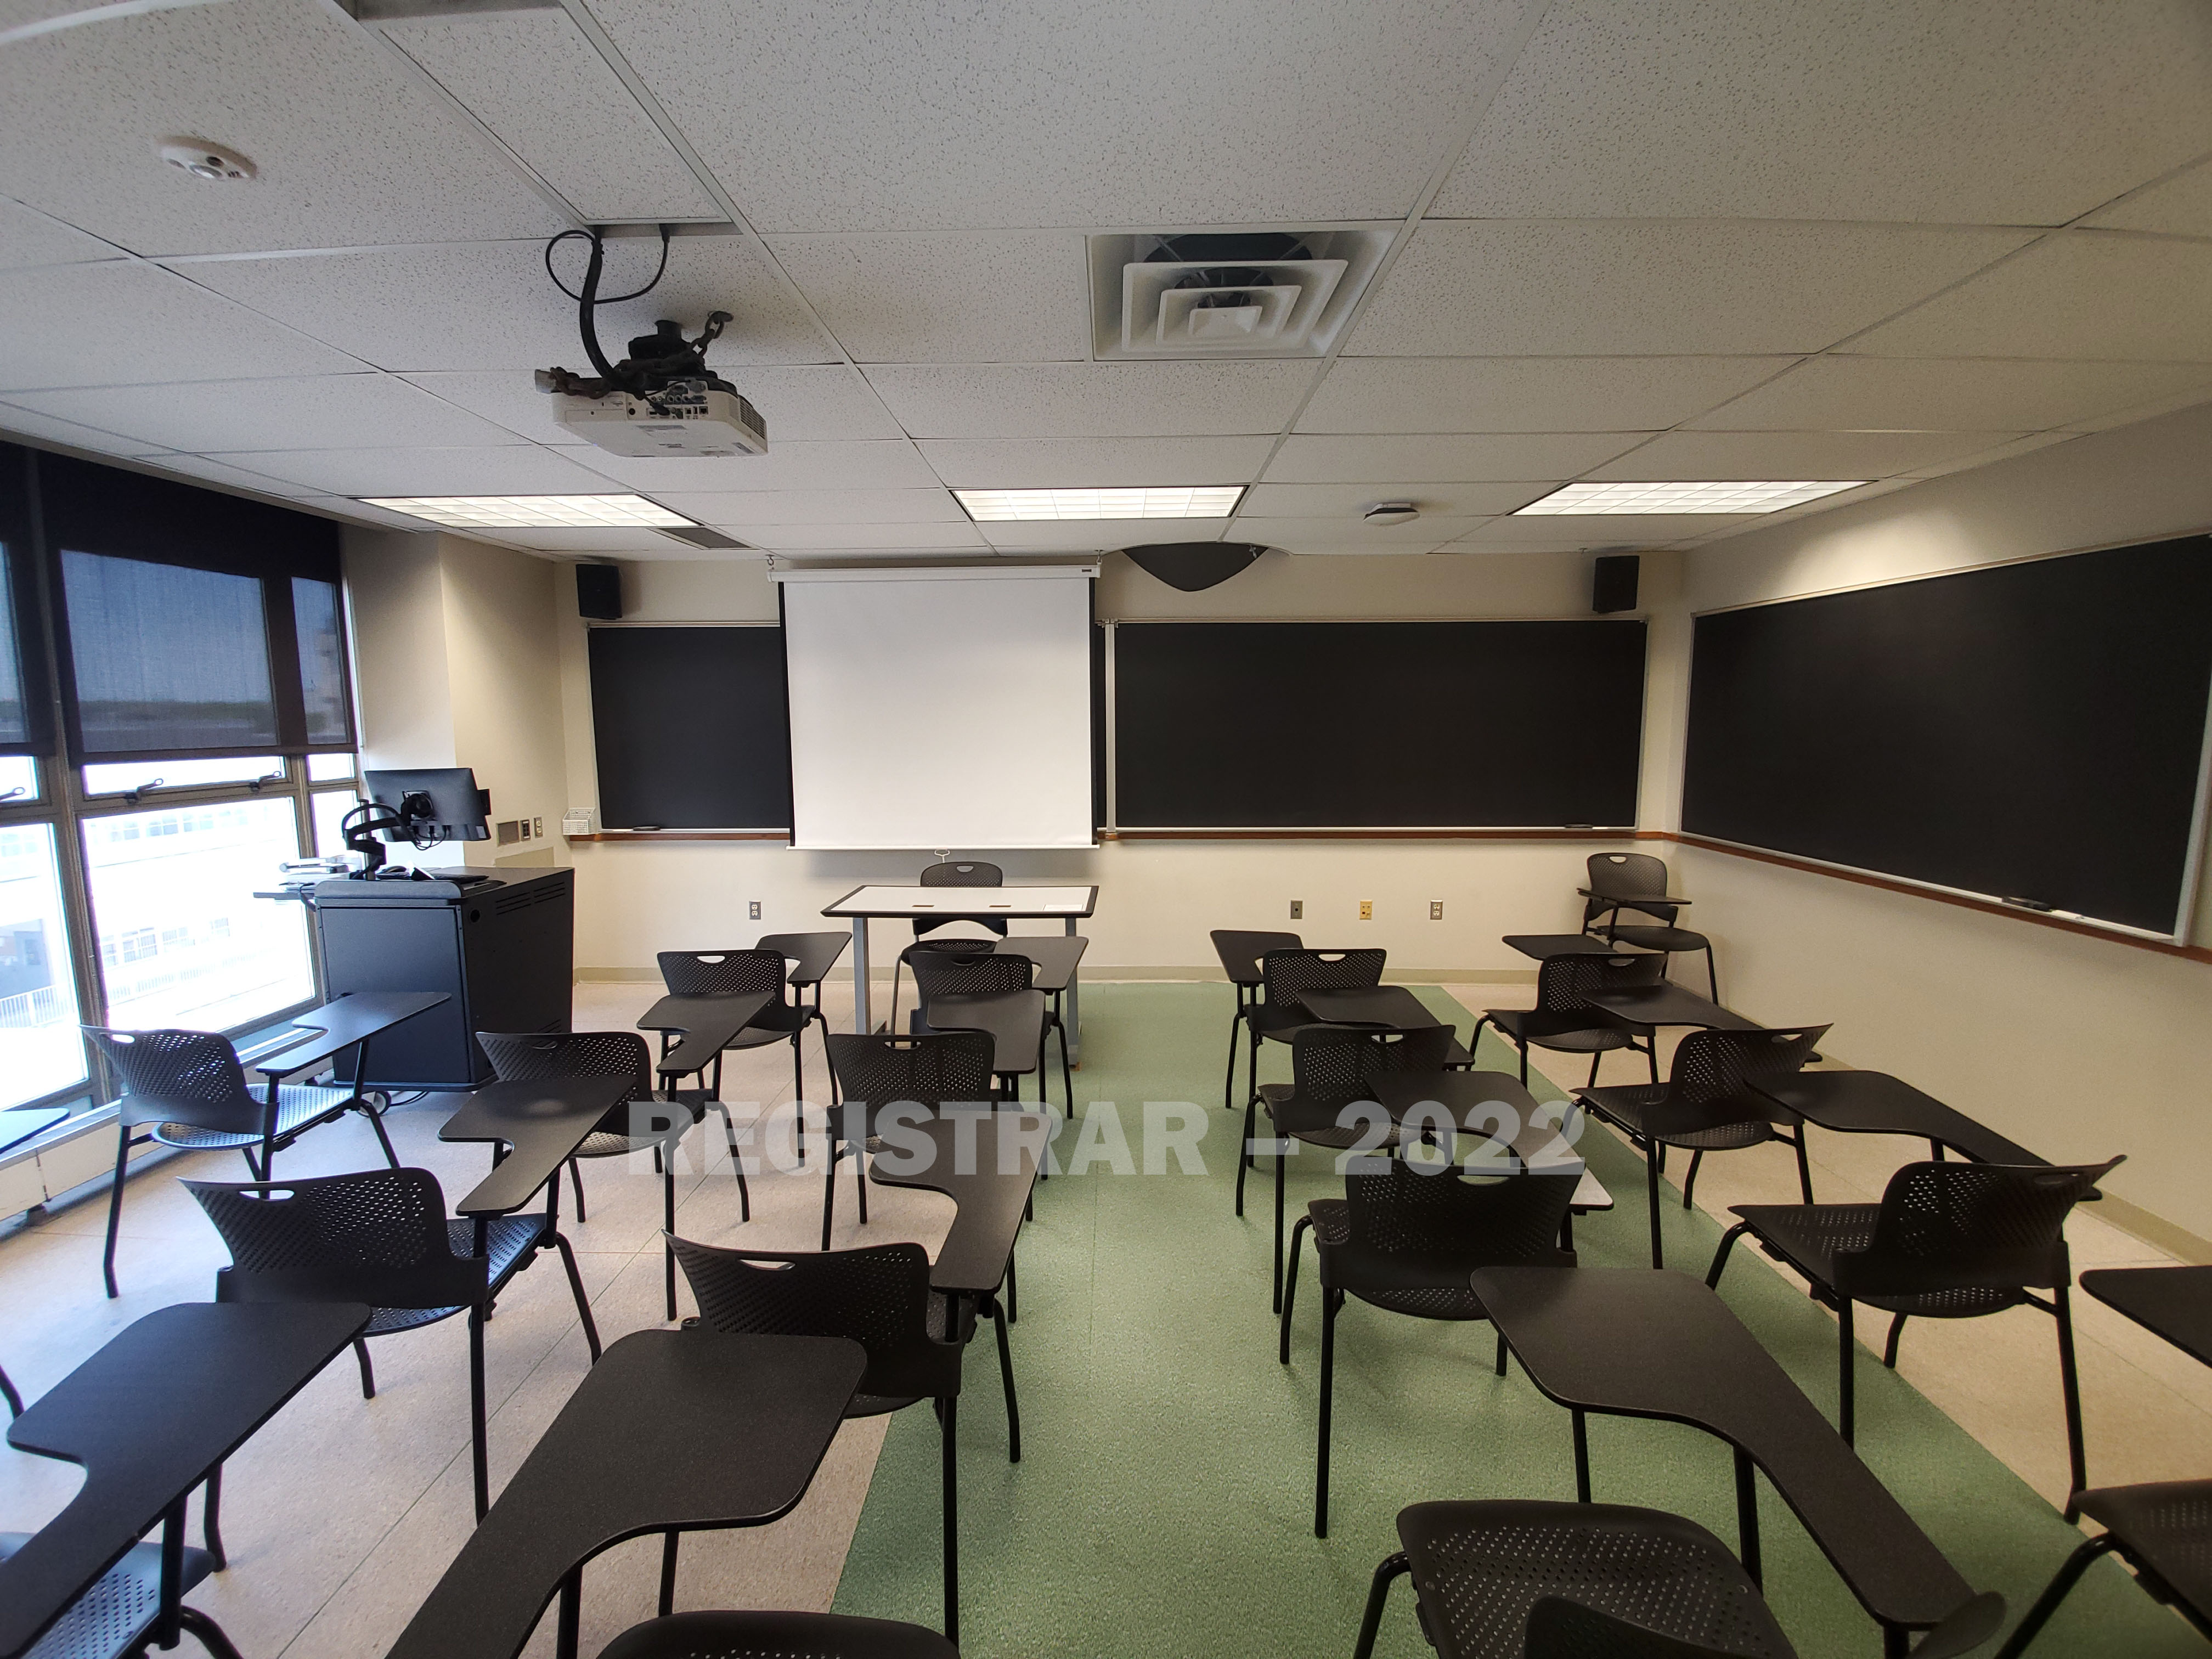 Enarson Classroom Building room 346 ultra wide angle view from the back of the room with projector screen down